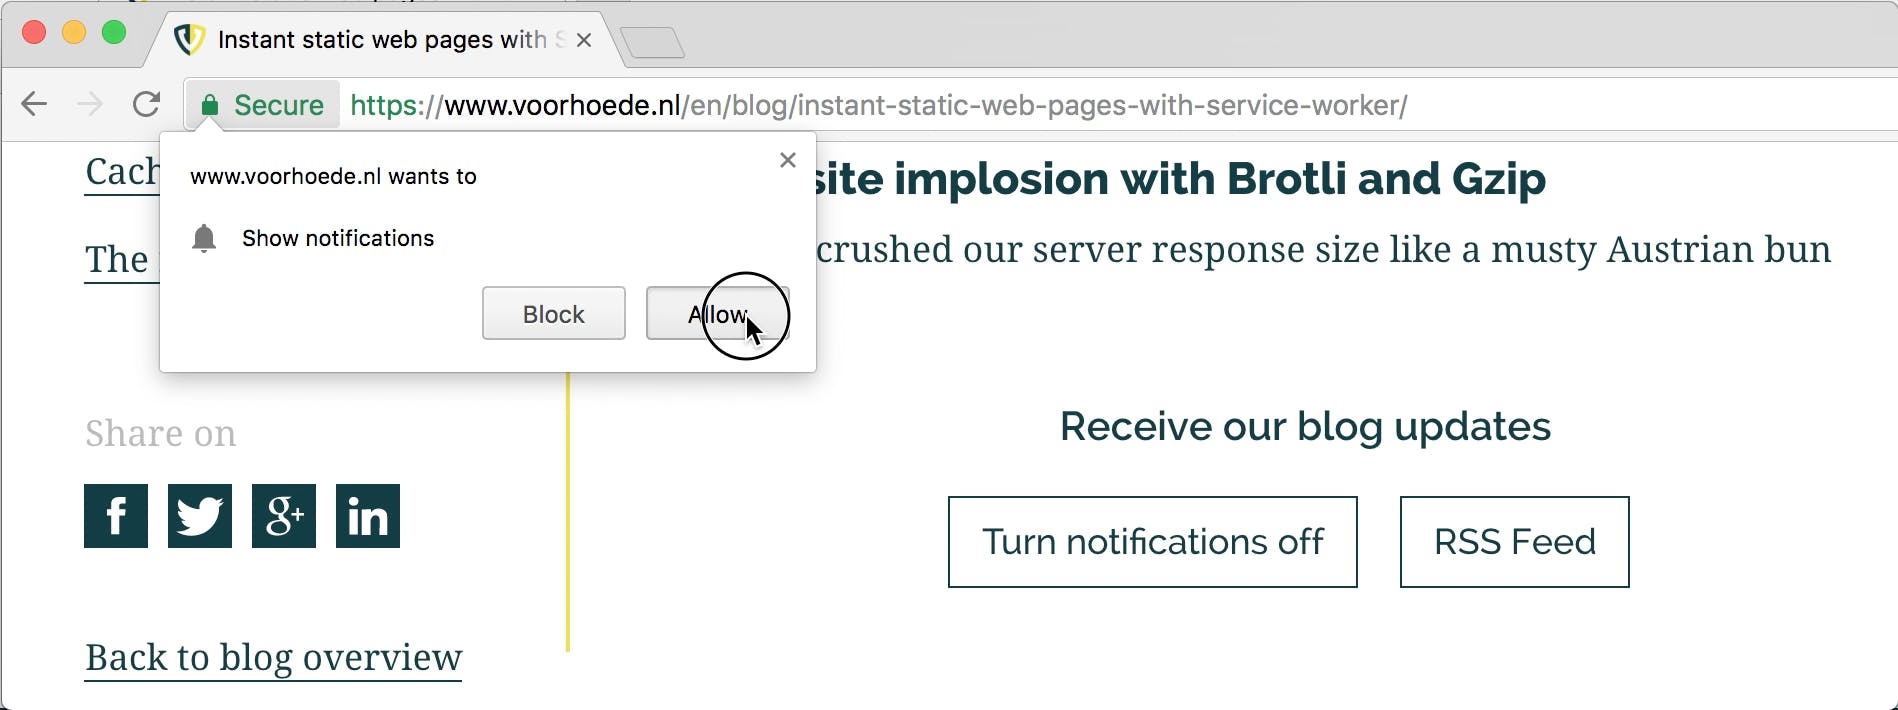 A native prompt to allow push notifications in Chrome opens on top of our website.